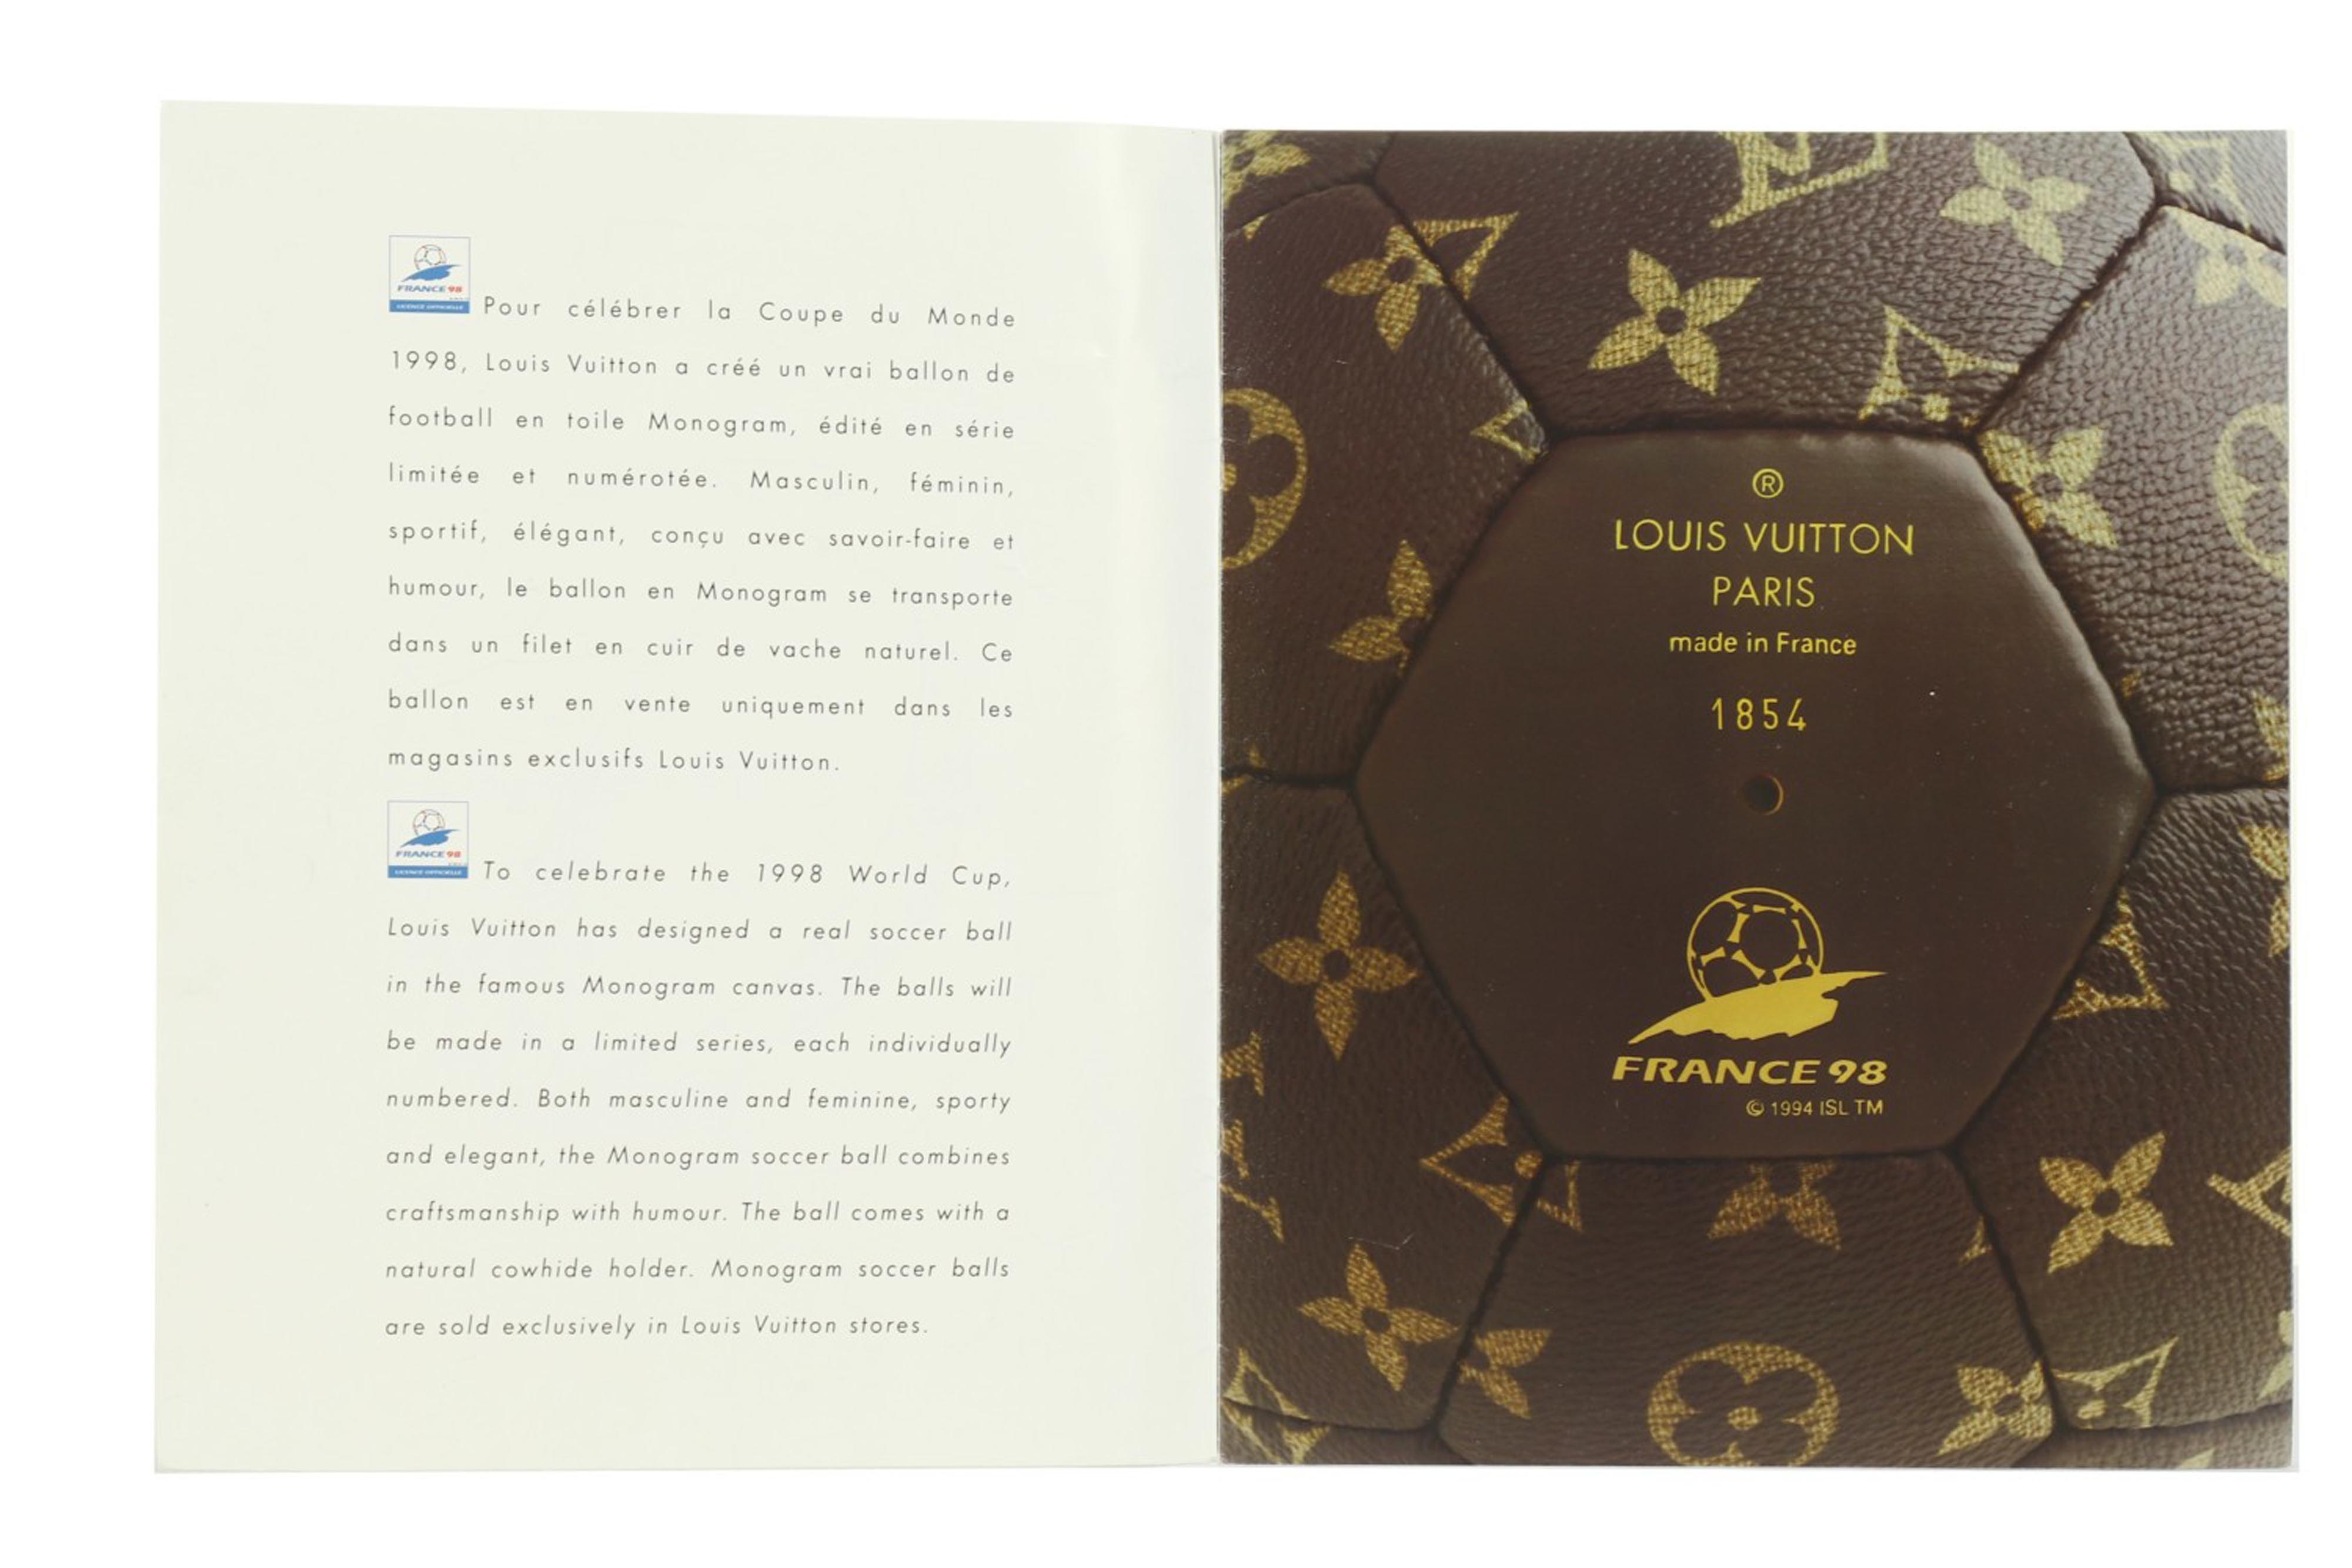 Louis Vuitton limited soccer ball to commemorate the 1998 World